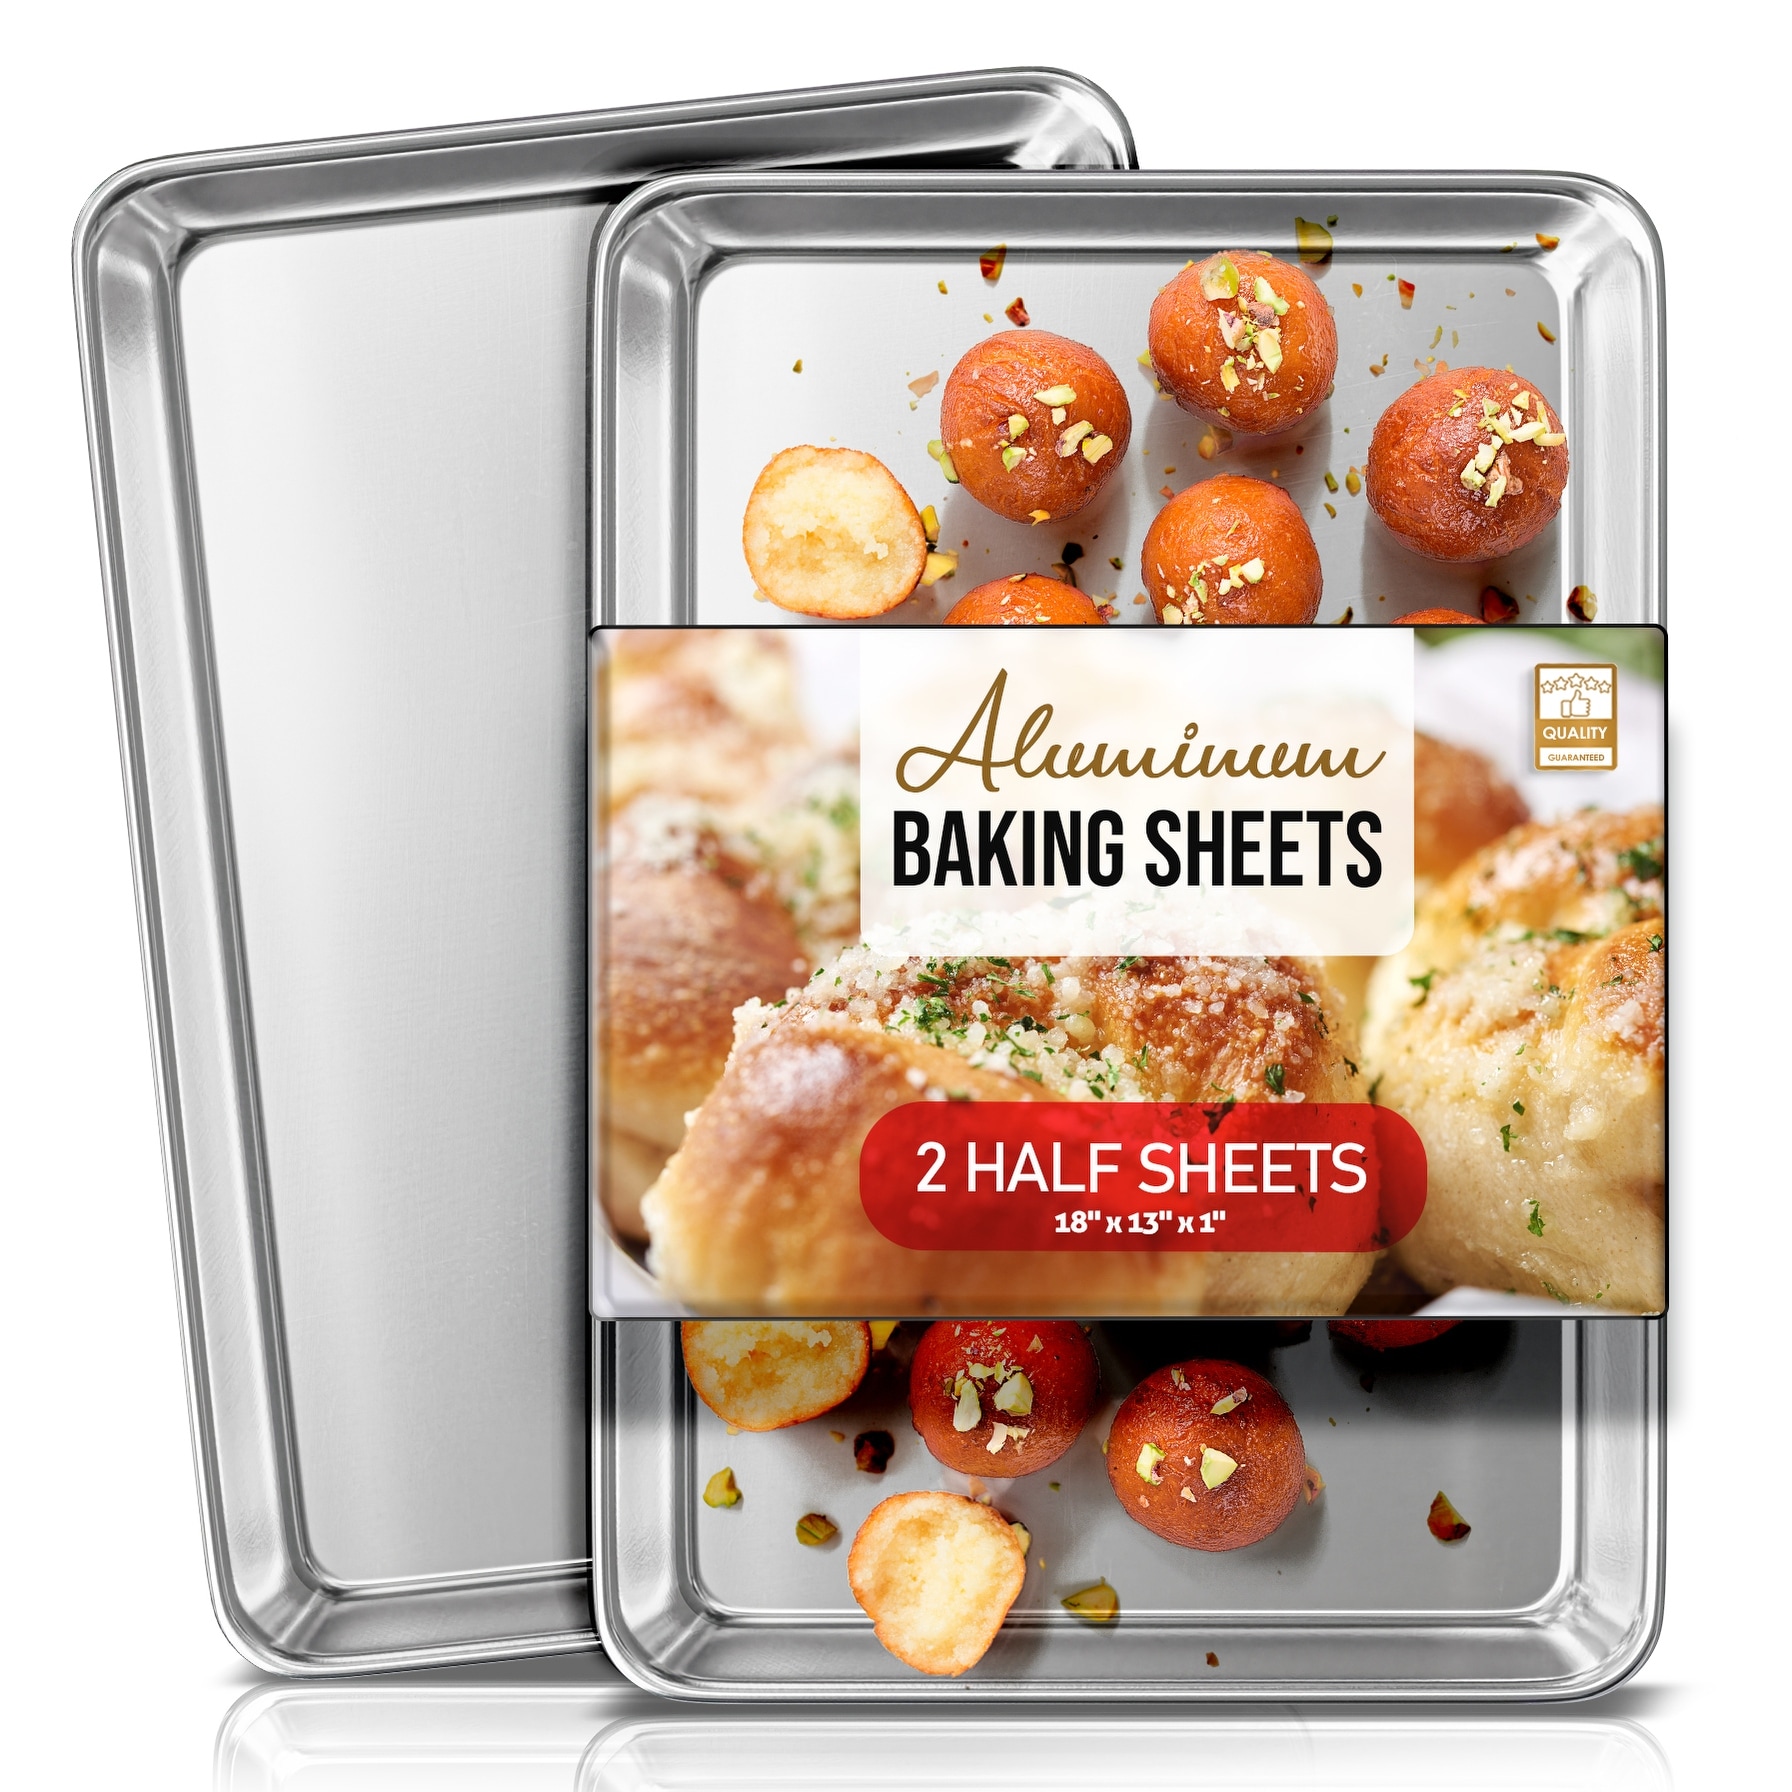 https://ak1.ostkcdn.com/images/products/is/images/direct/ff8b508a0a3d3df7b1d6c81d269fb70e2966fdaf/JoyTable-Aluminum-Steel-Non-stick-Baking-Sheet-Cookie-Sheet-Set.jpg